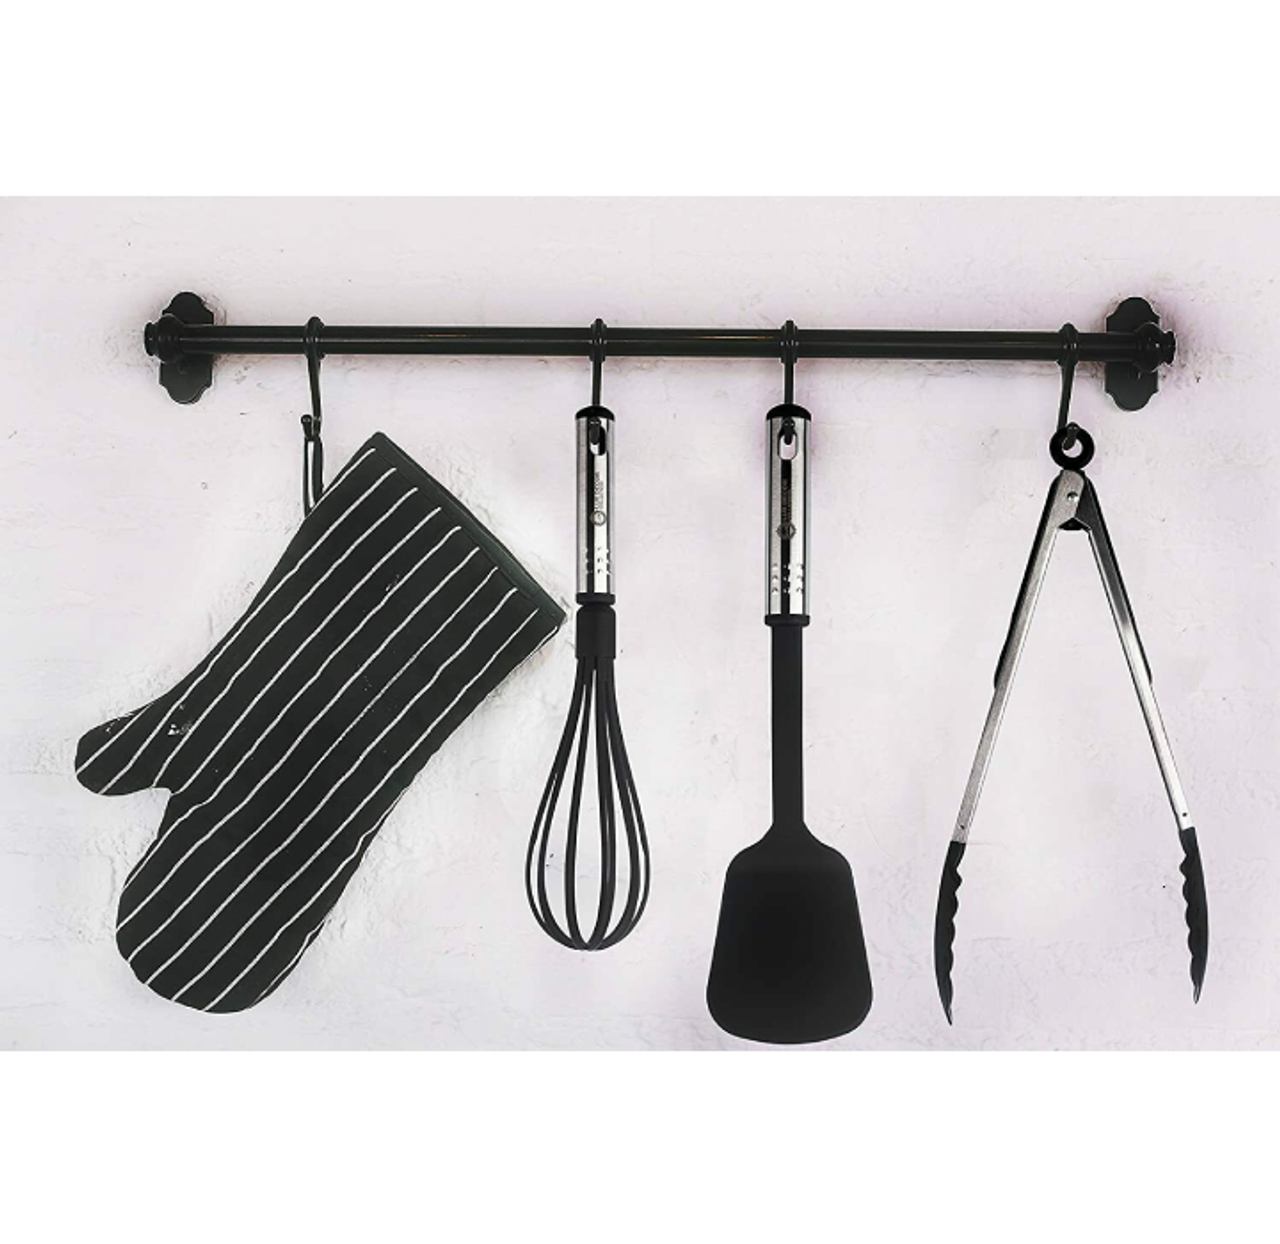 23-Piece Kitchen Utensil Set with Stainless Steel Handles product image